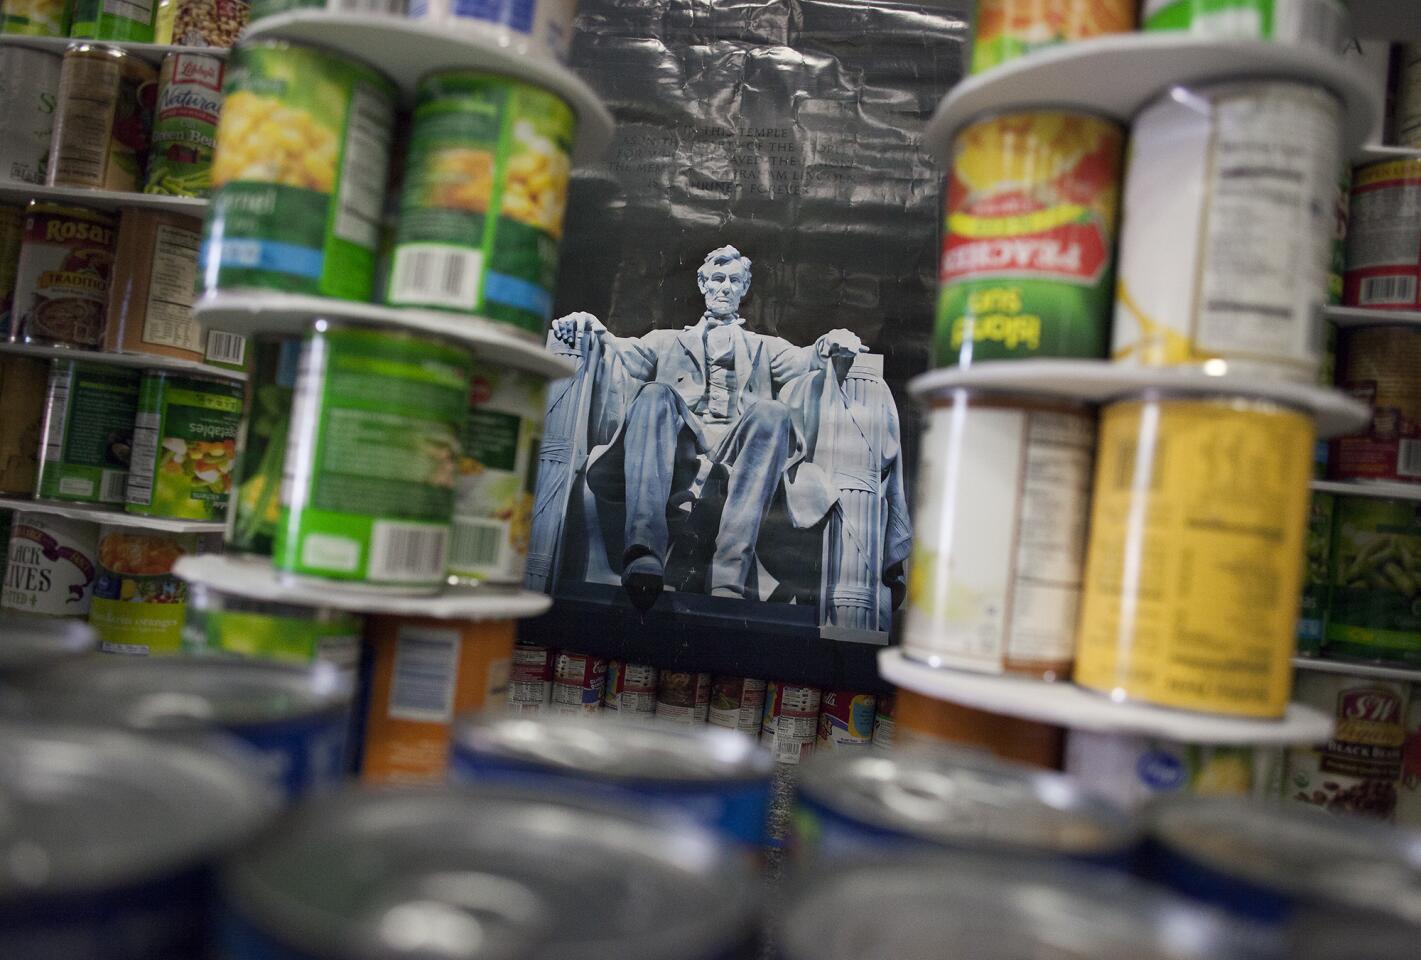 Canned Food Castle Competition